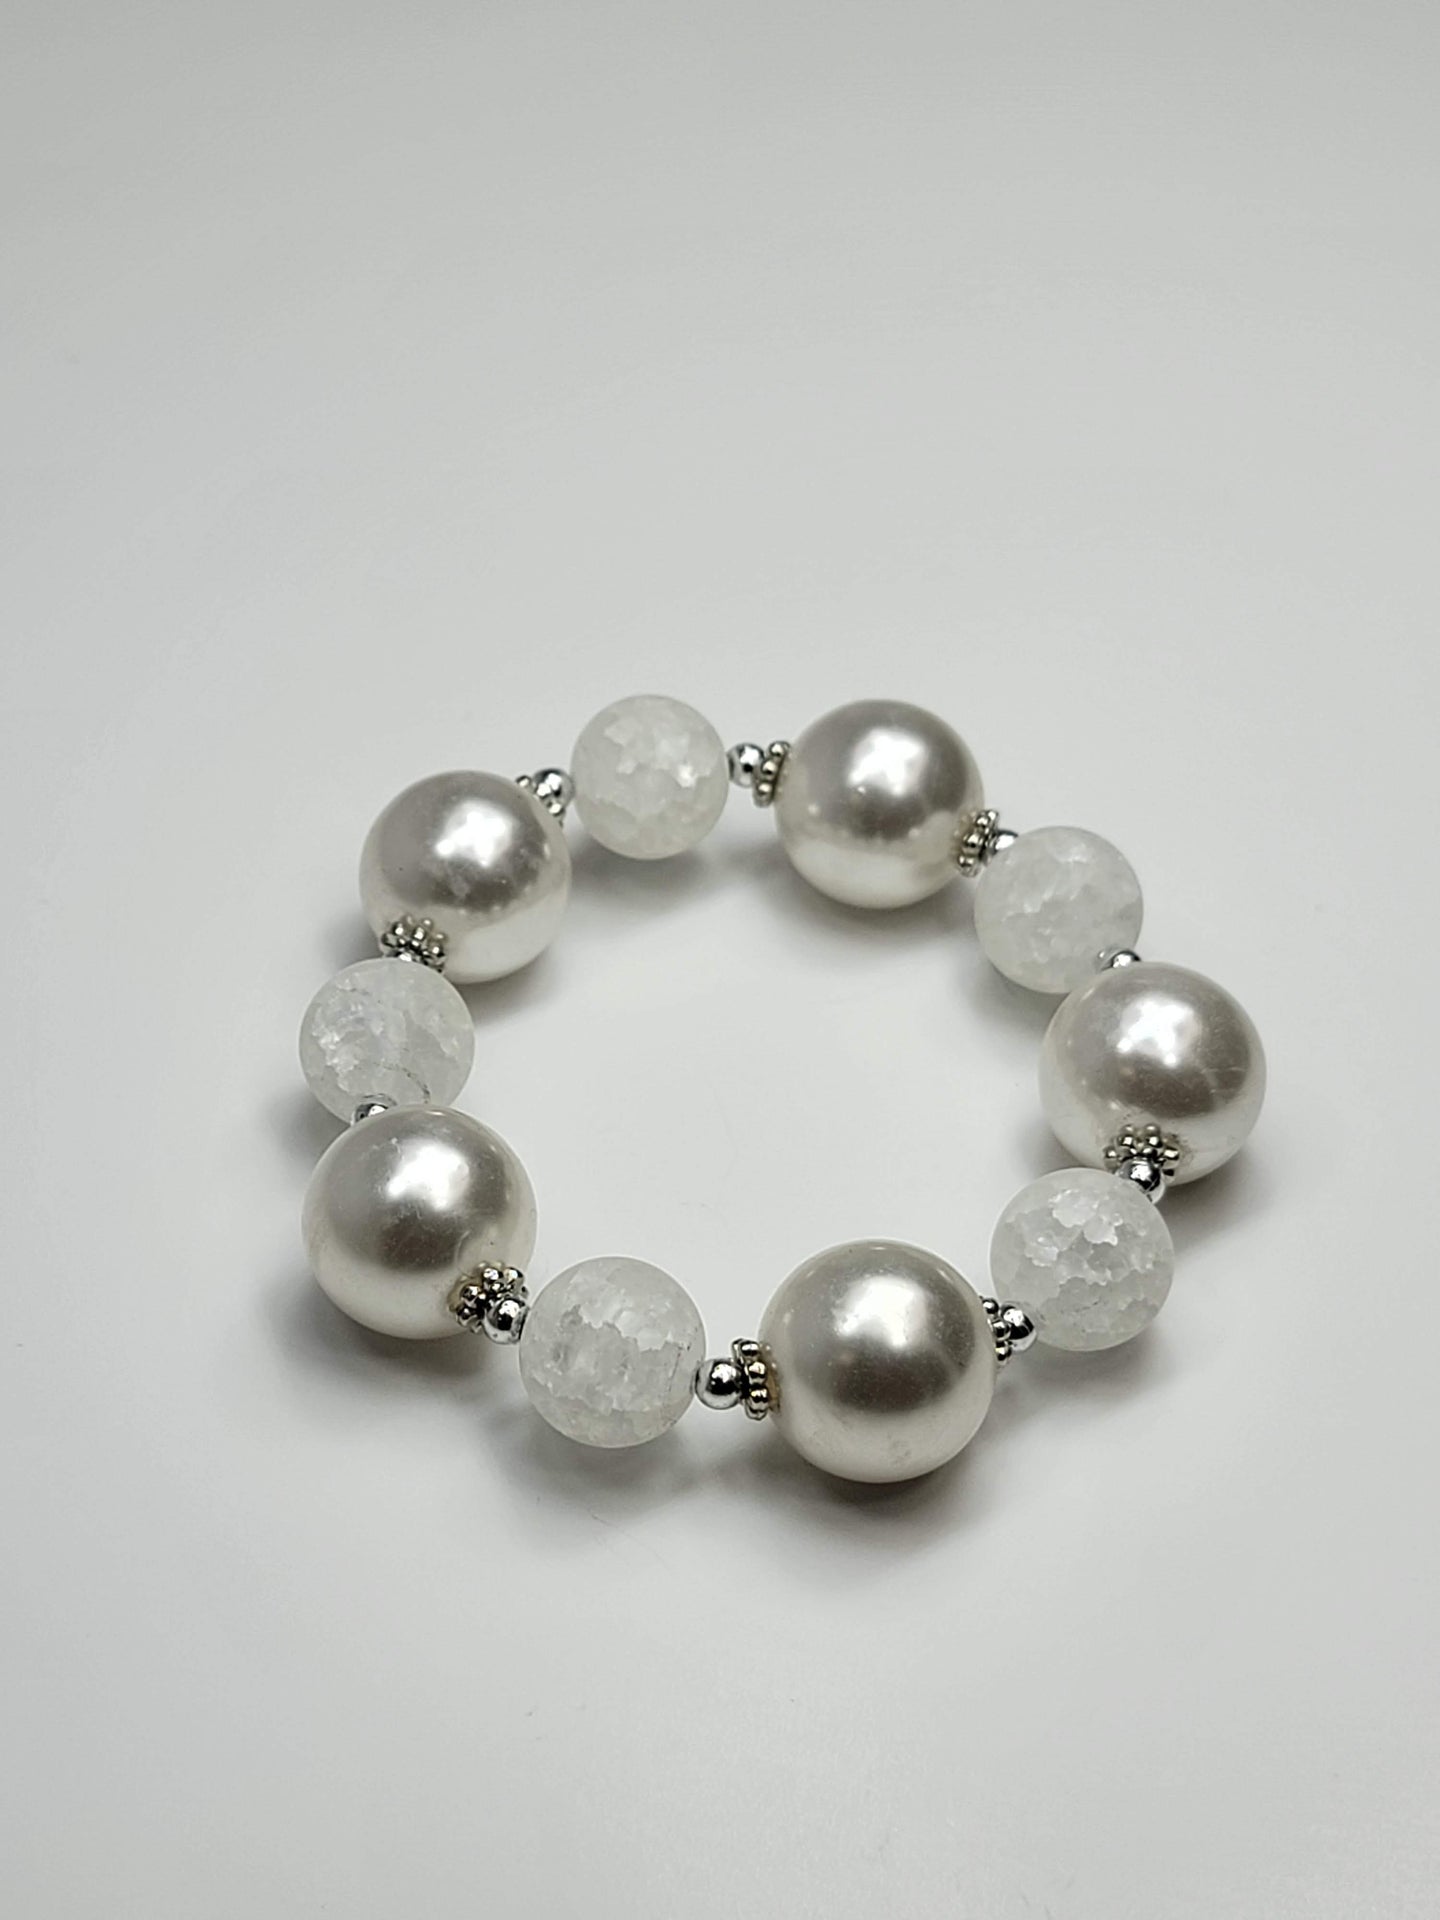 White, Pearl & Silver Bracelet - One of a kind